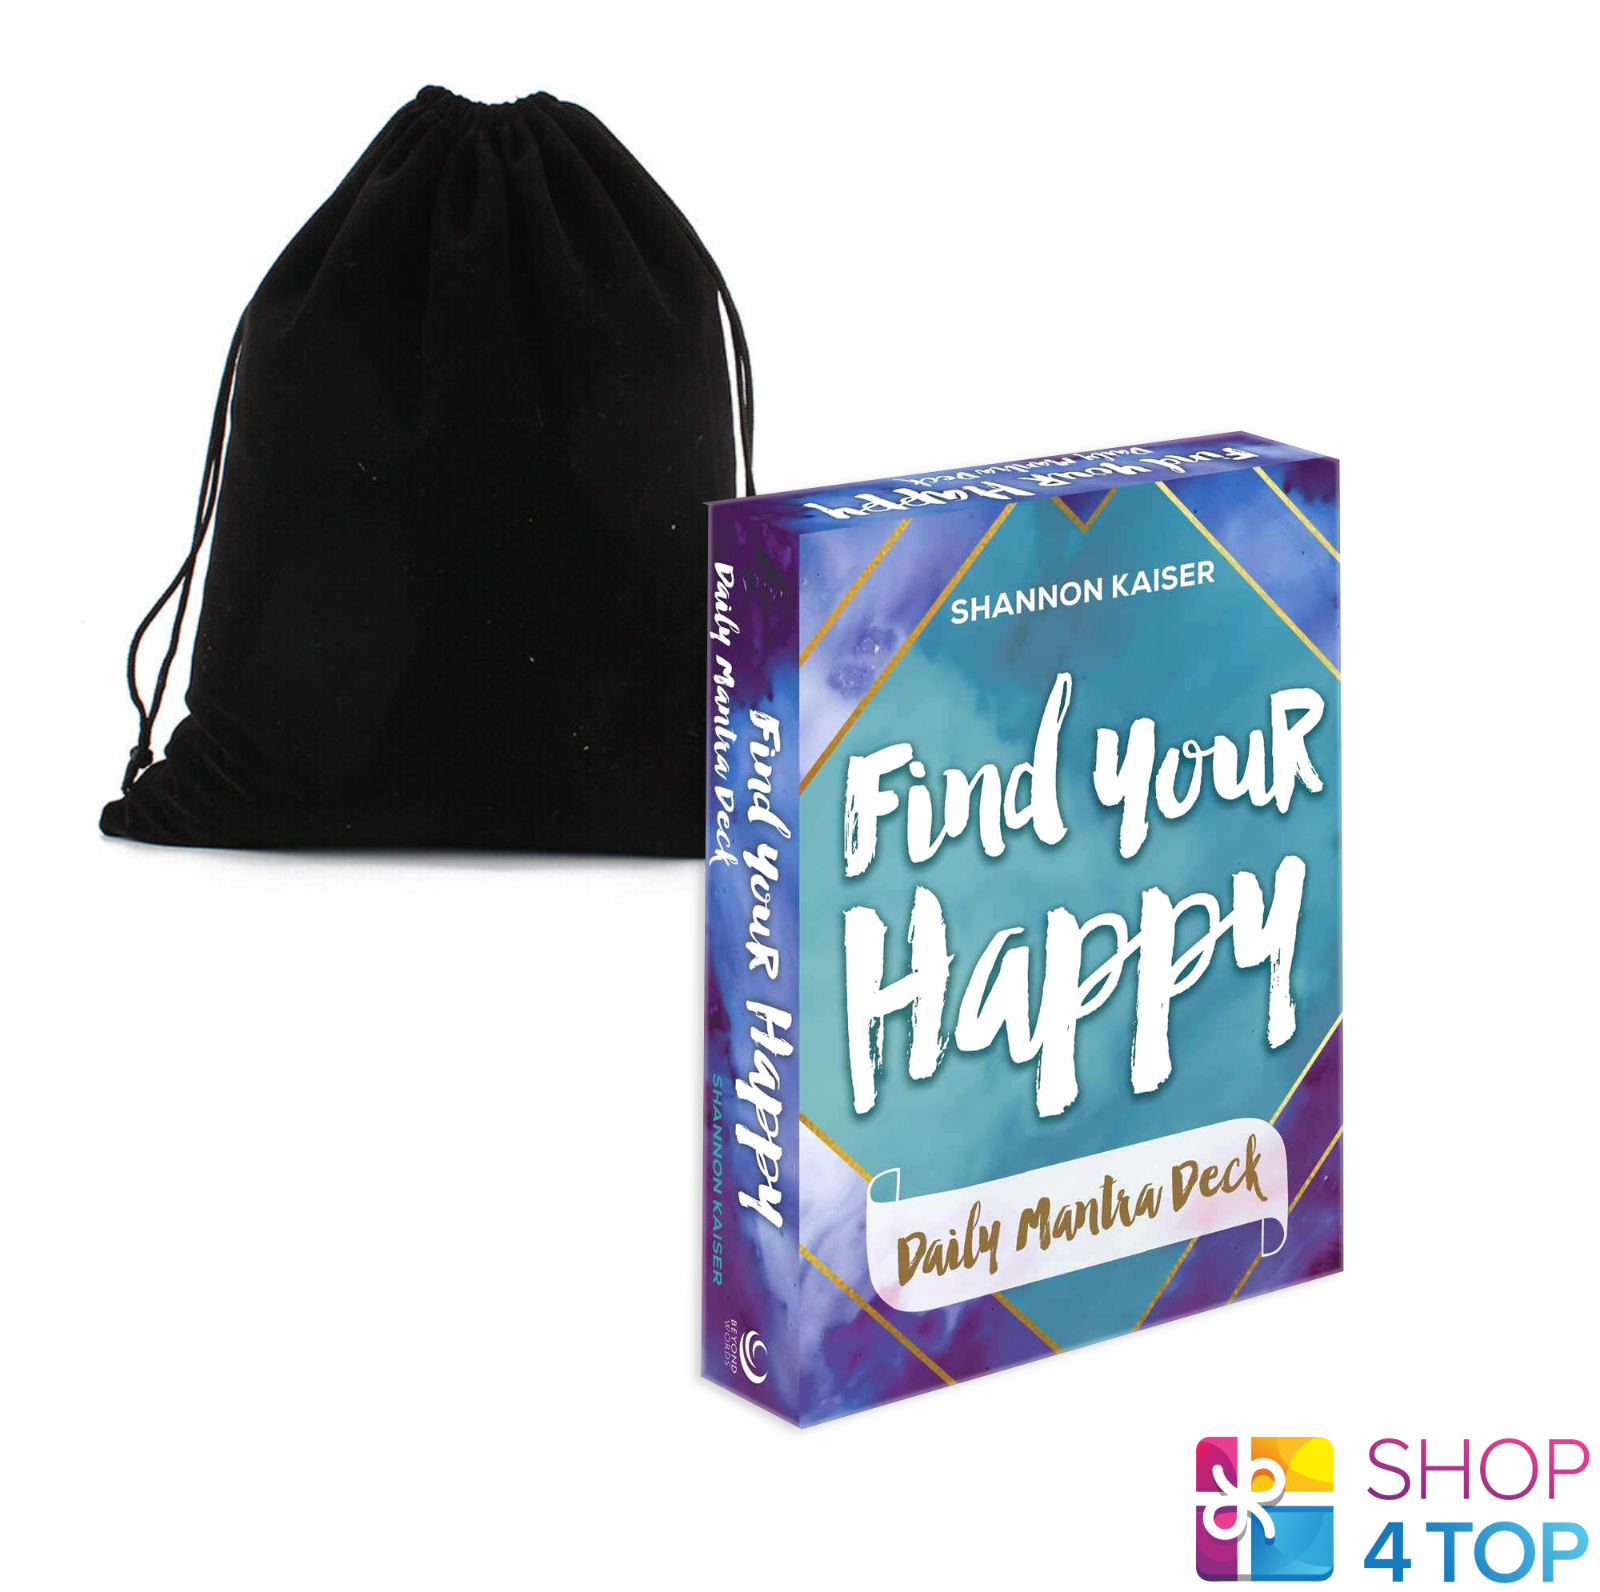 Find Your Happy Daily Mantra Cards And Velvet Bag Deck Beyond Words Esoteric New